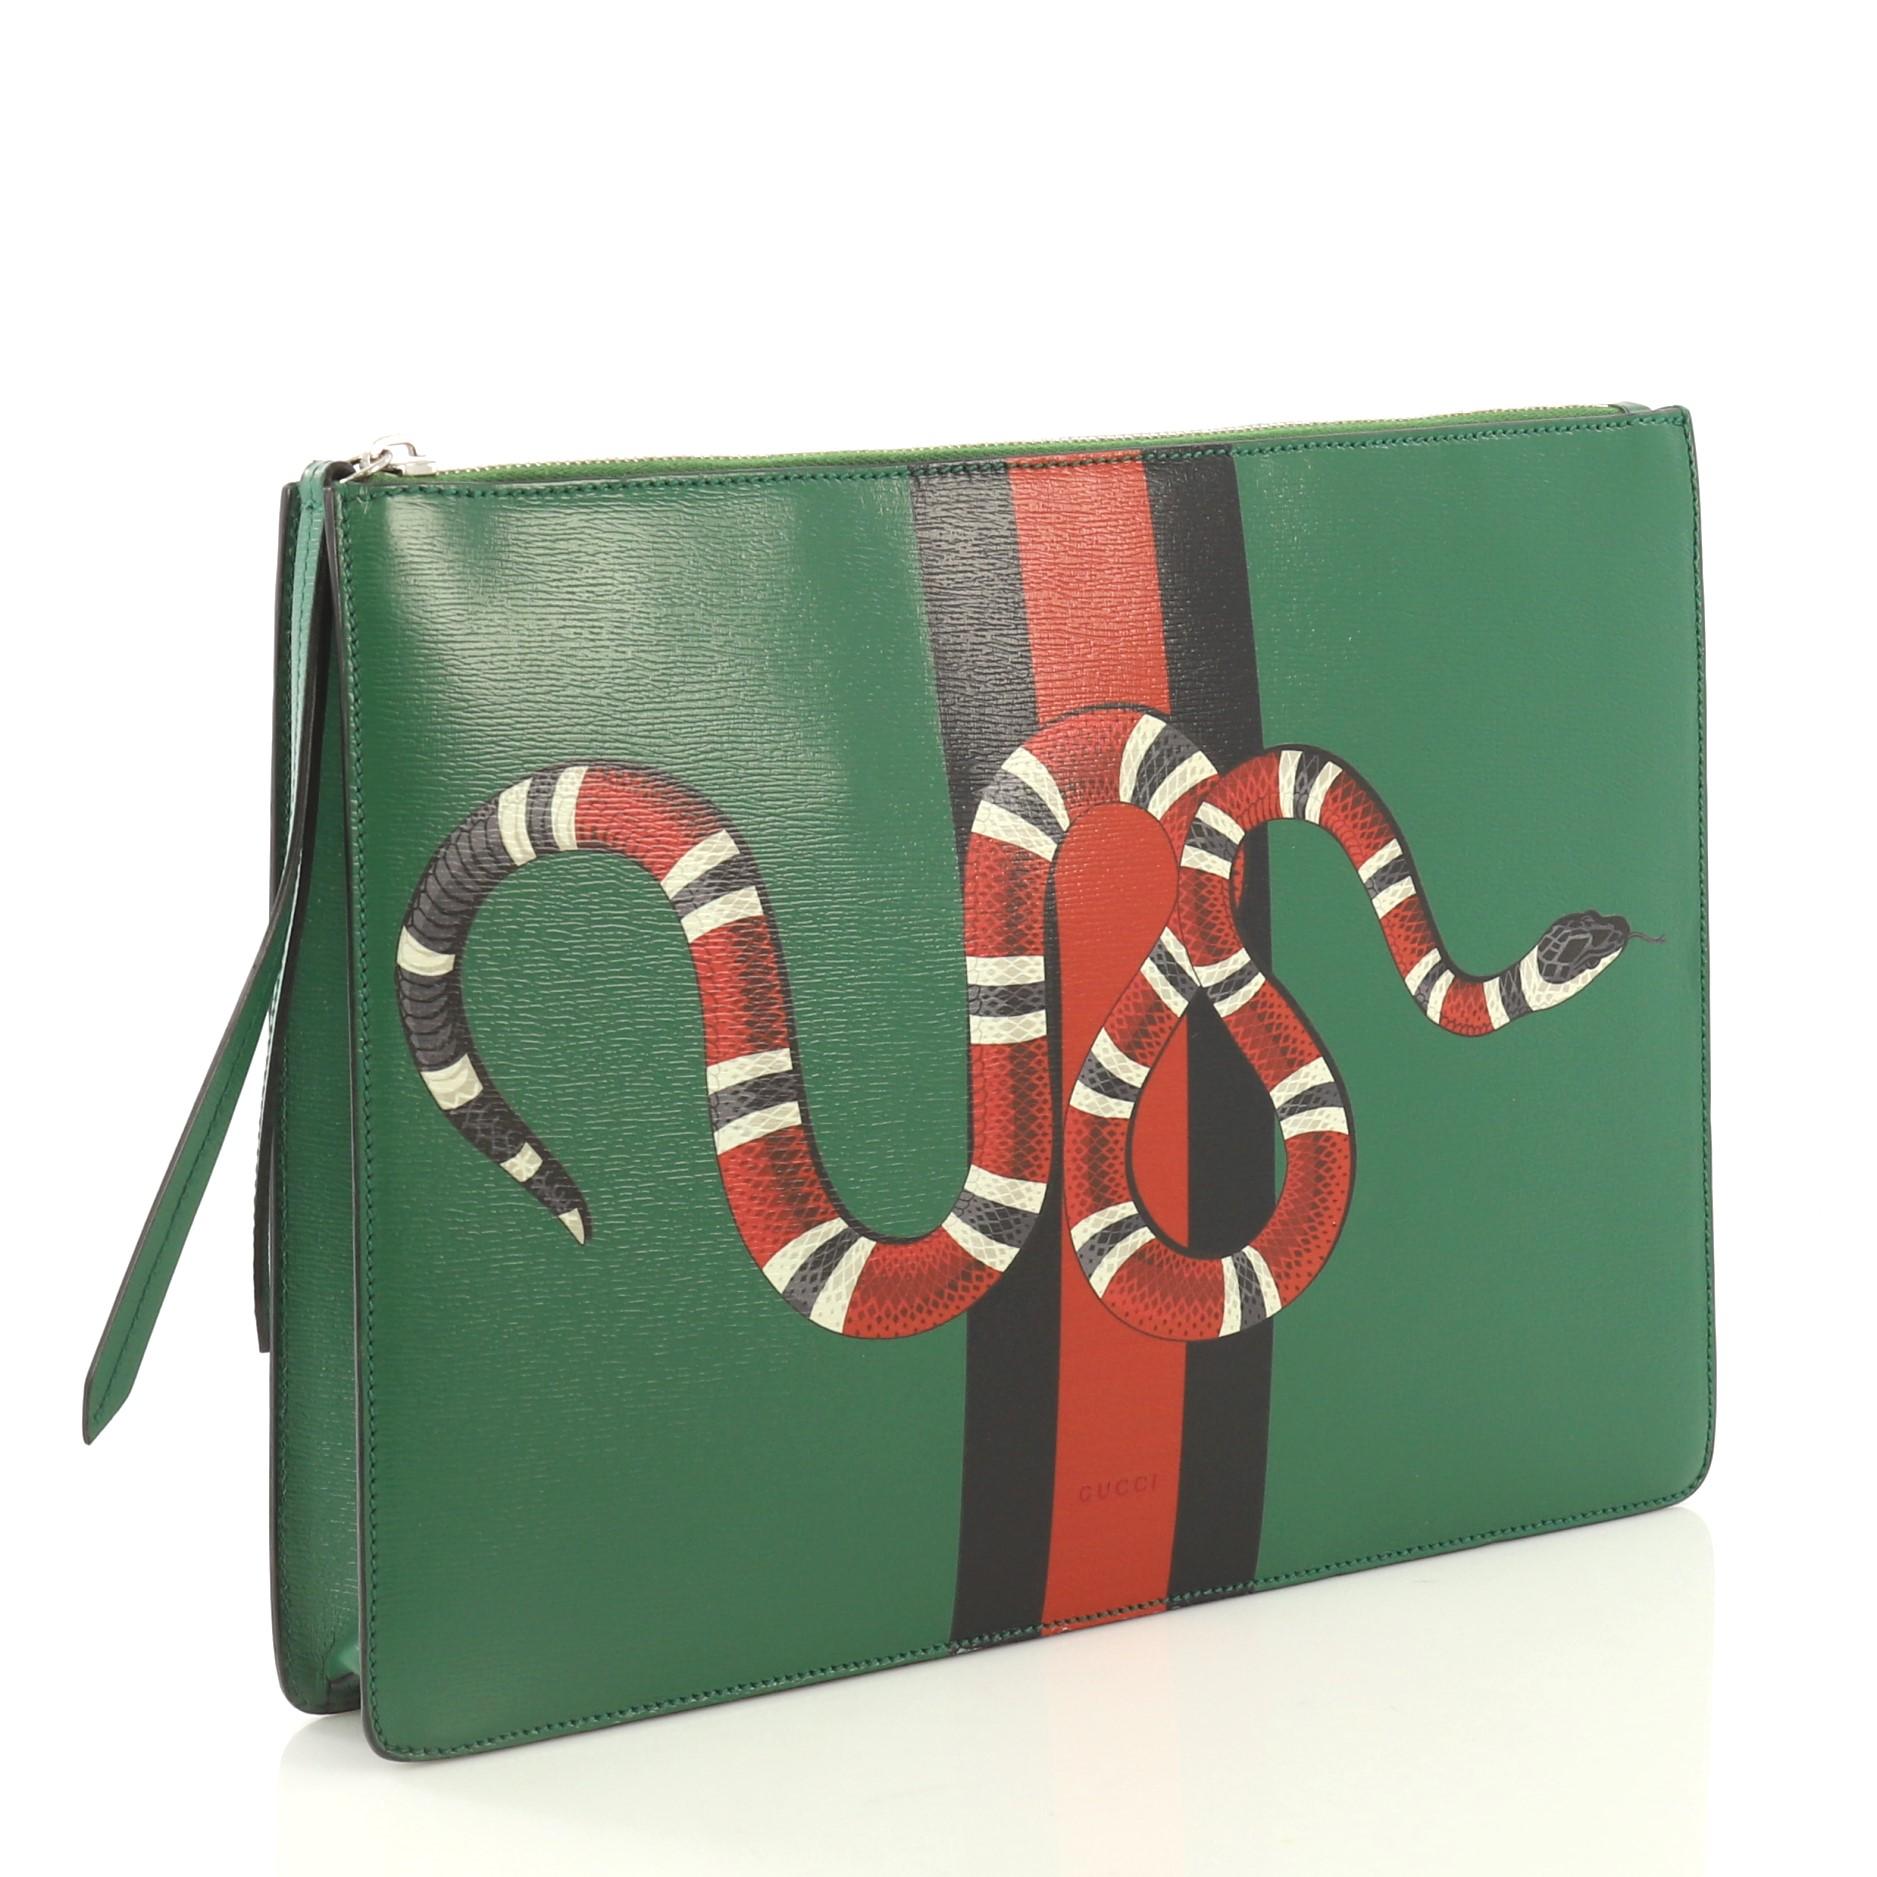 This Gucci Web and Snake Messenger Bag Printed Leather Large, crafted from green printed leather, features adjustable leather strap, snake print against web detail, and silver-tone hardware. Its zip closure opens to a gray microfiber interior with